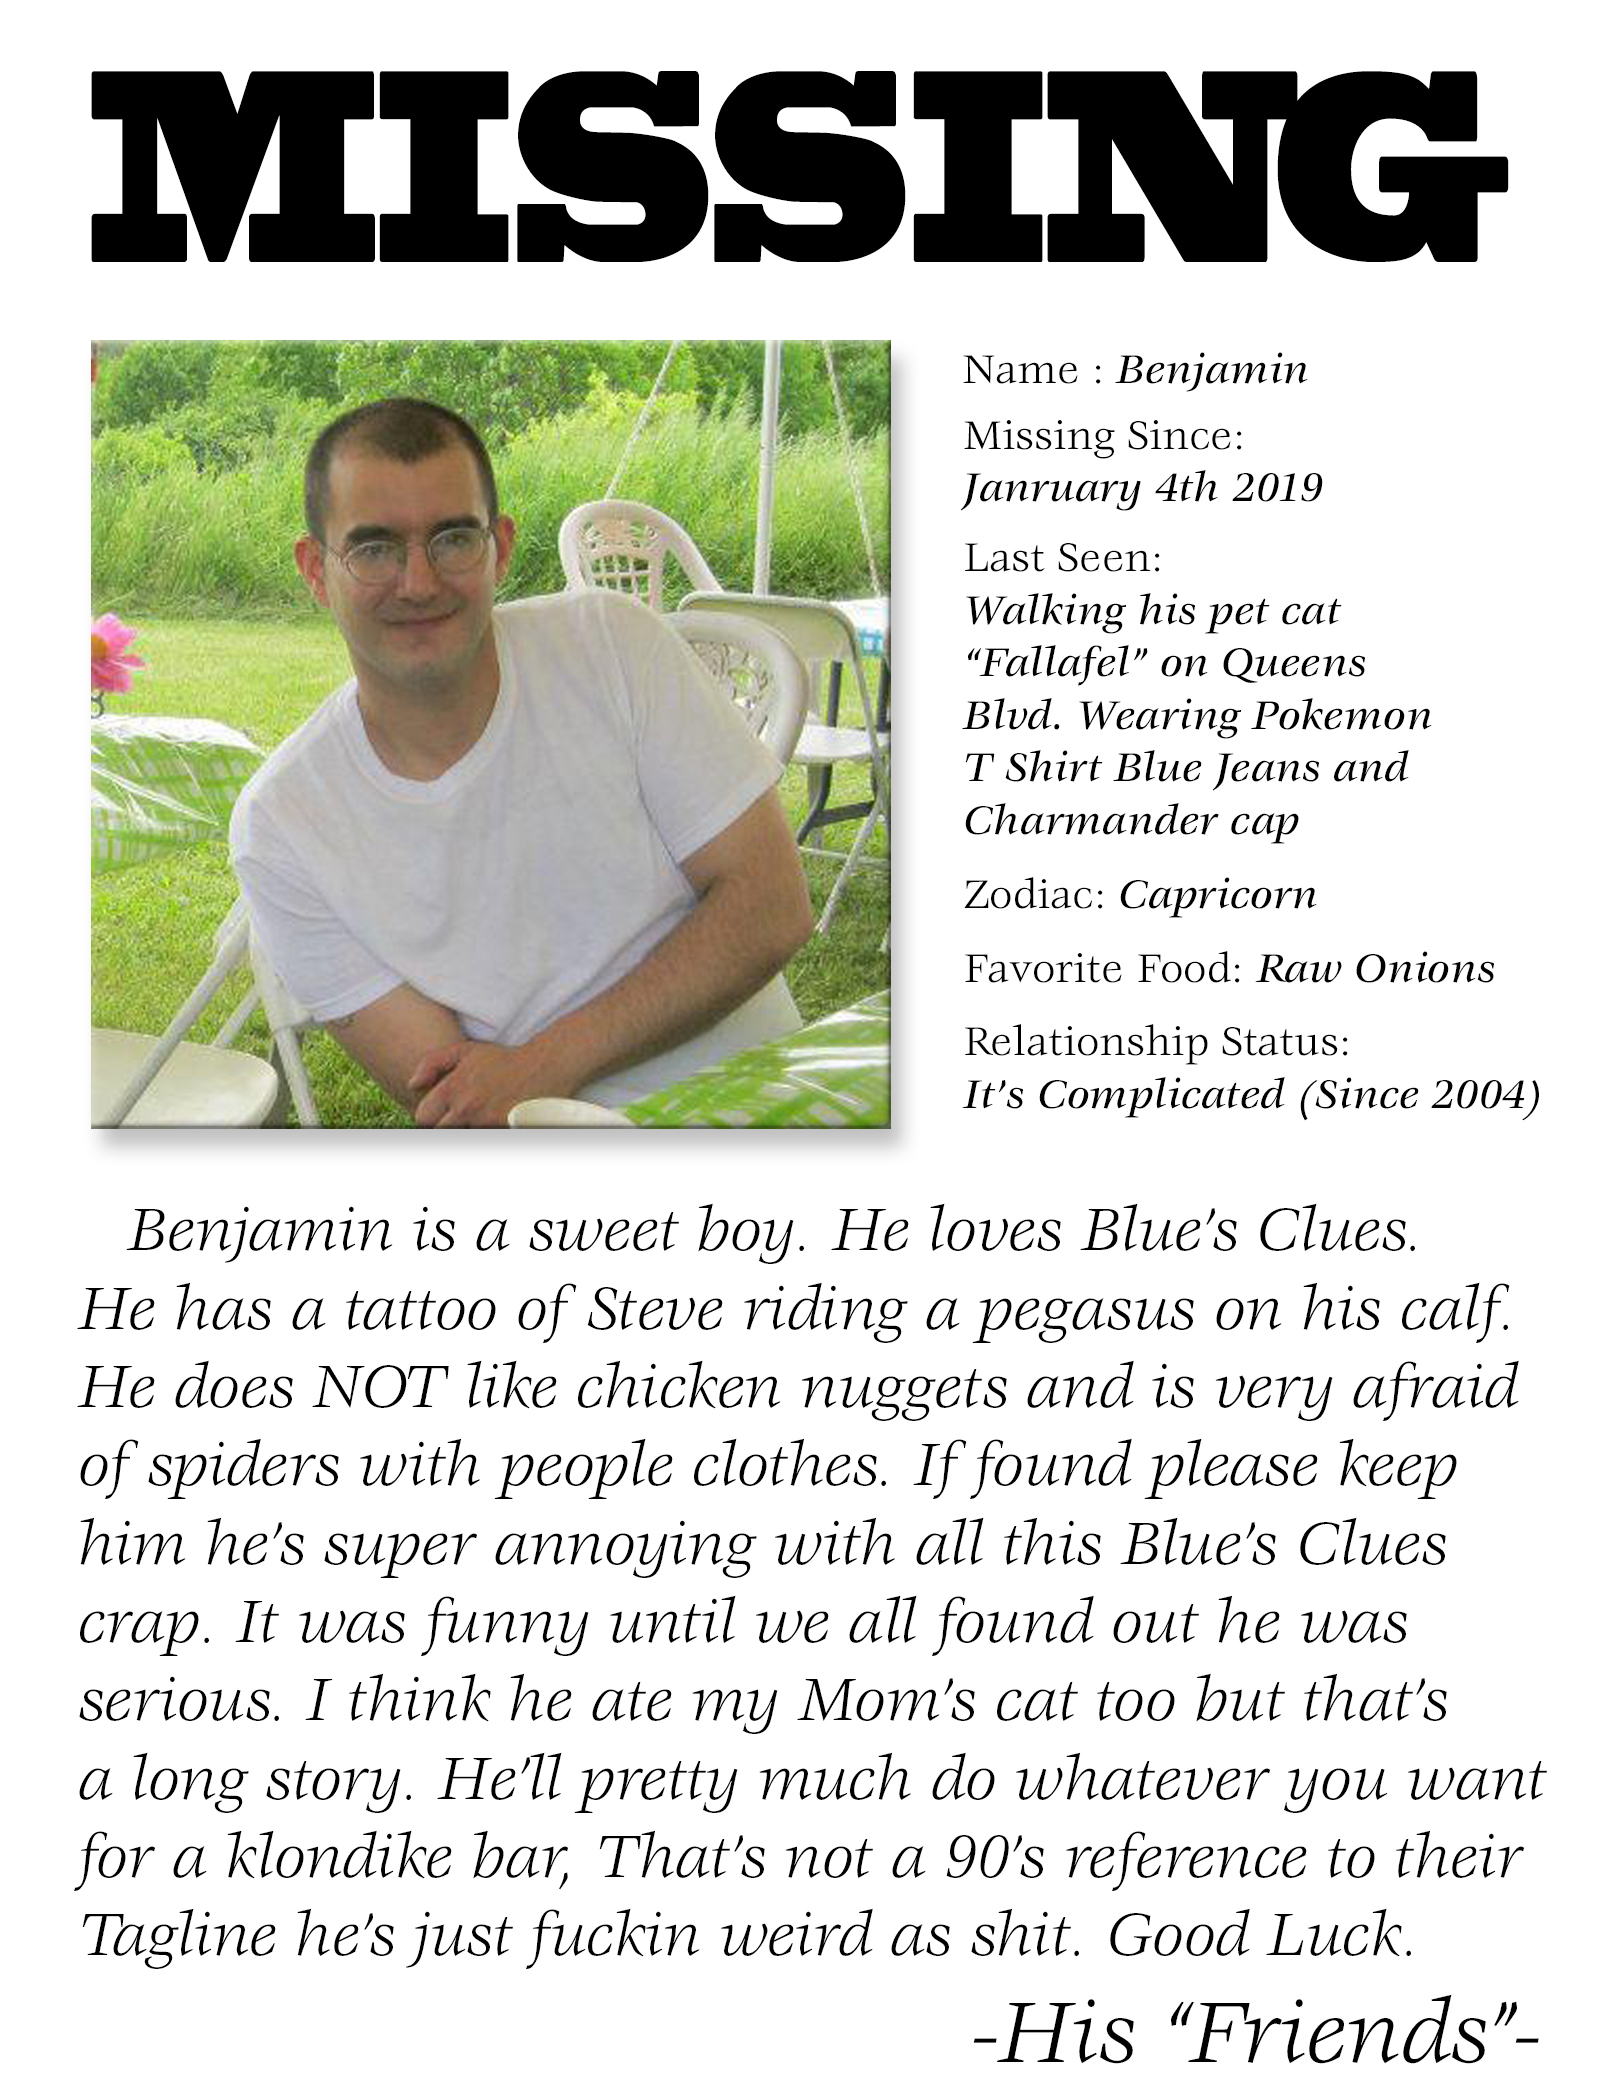 grass - Missing Name Benjamin Missing Since Janruary 4th 2019 Last Seen Walking his per car "Fallafel" on Queens Blvd. Wearing Pokemon T Shirt Blue Jeans and Charmander cap Zodiac Capricorn Favorite Food Raw Onions Relationship Status It's Complicated Sin